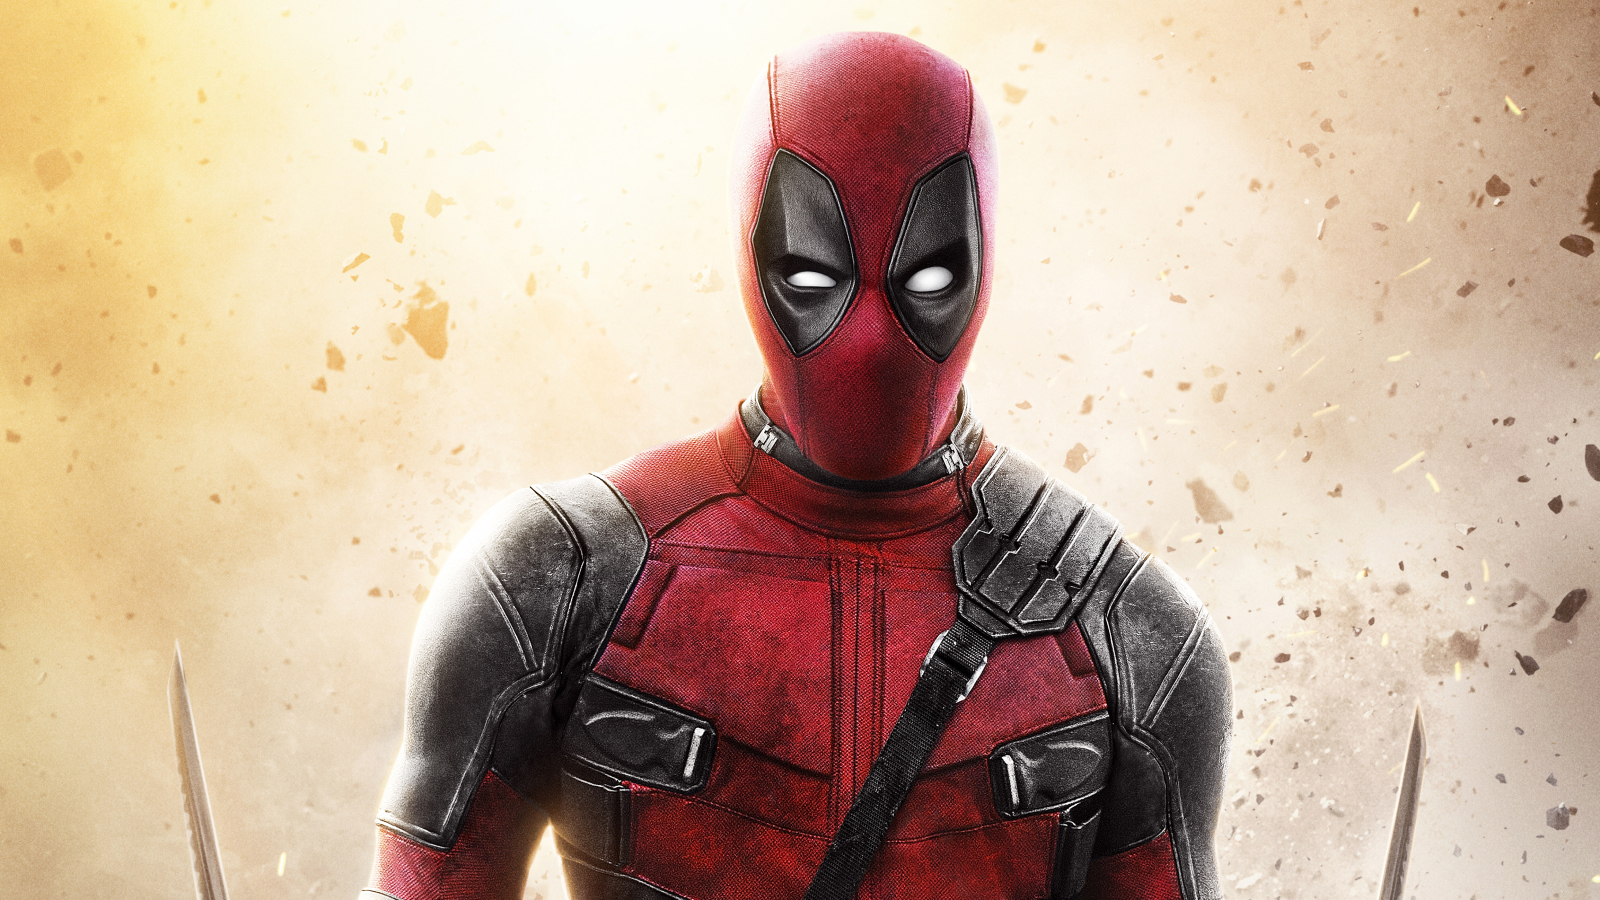 Deadpool character in costume